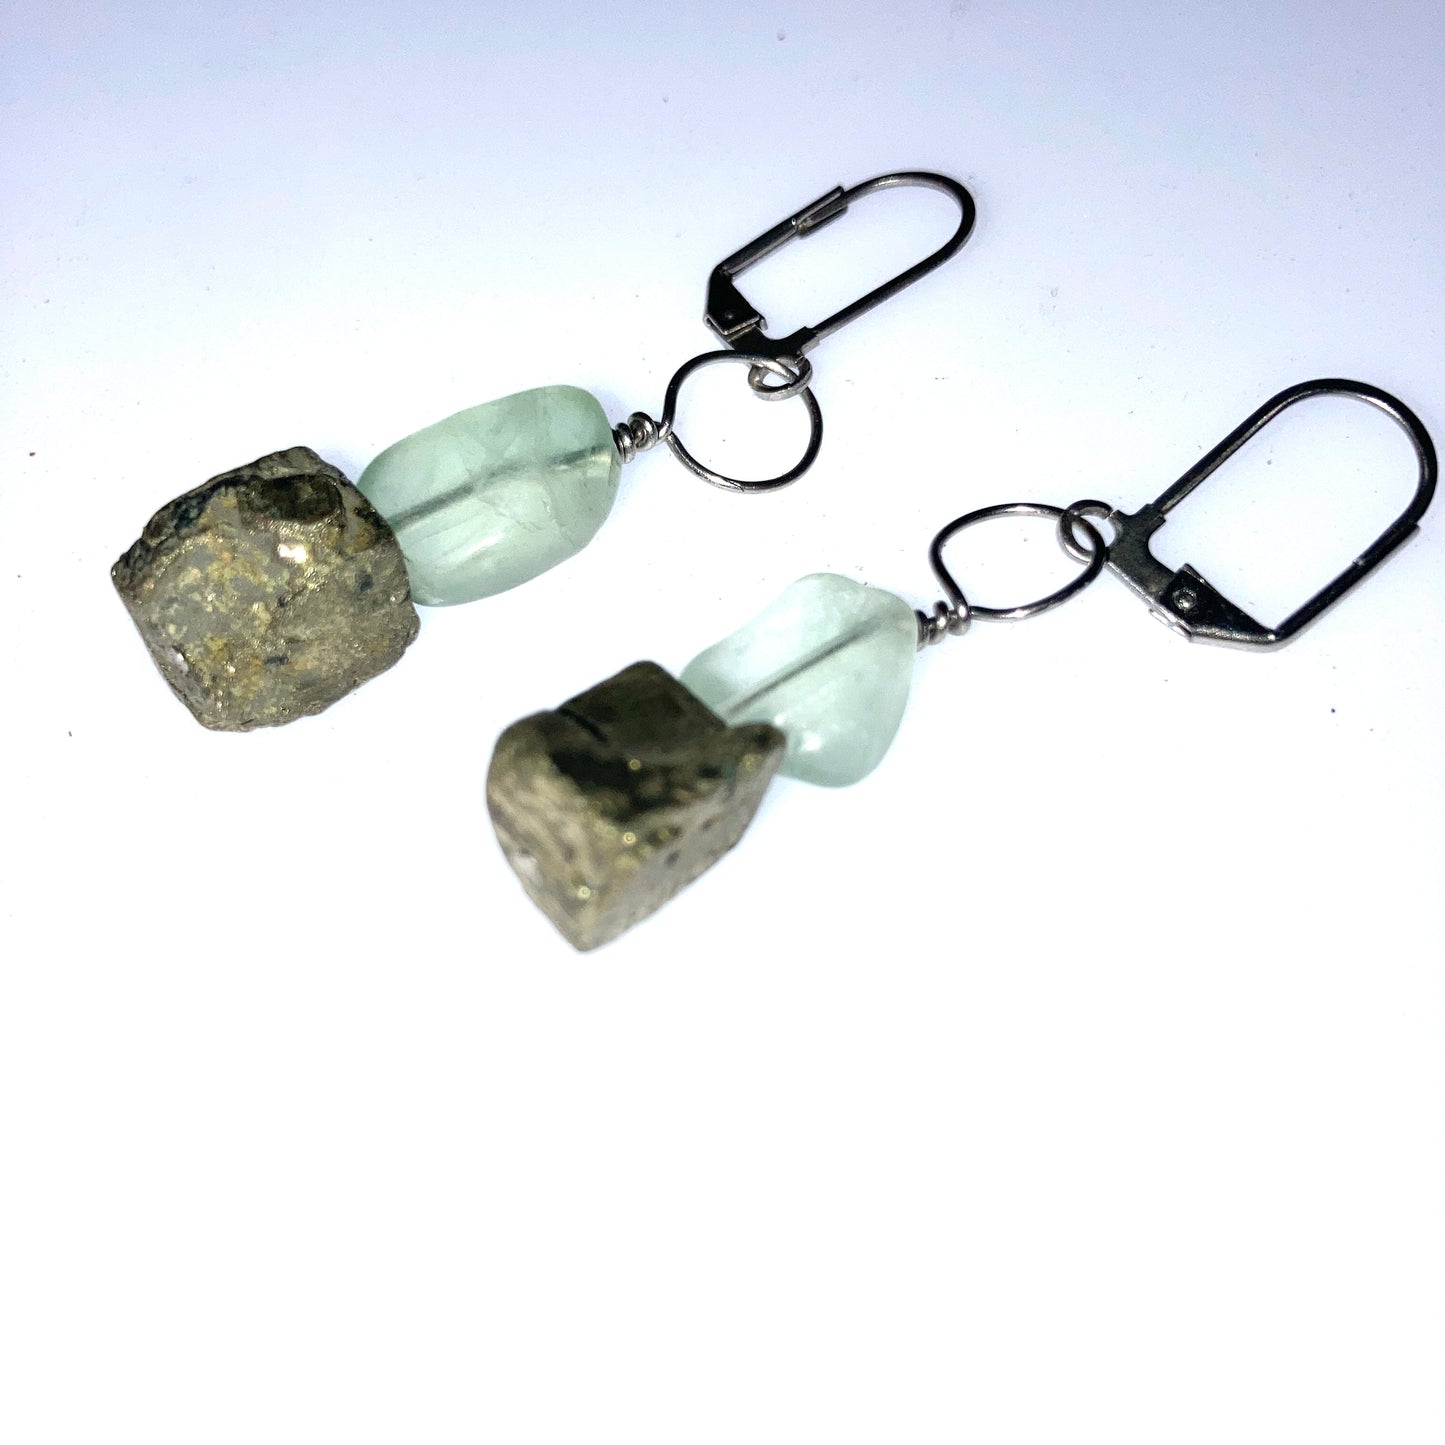 Free thinking earring peacemakers - Green Flourite 8-10mm, 10mm pyrite